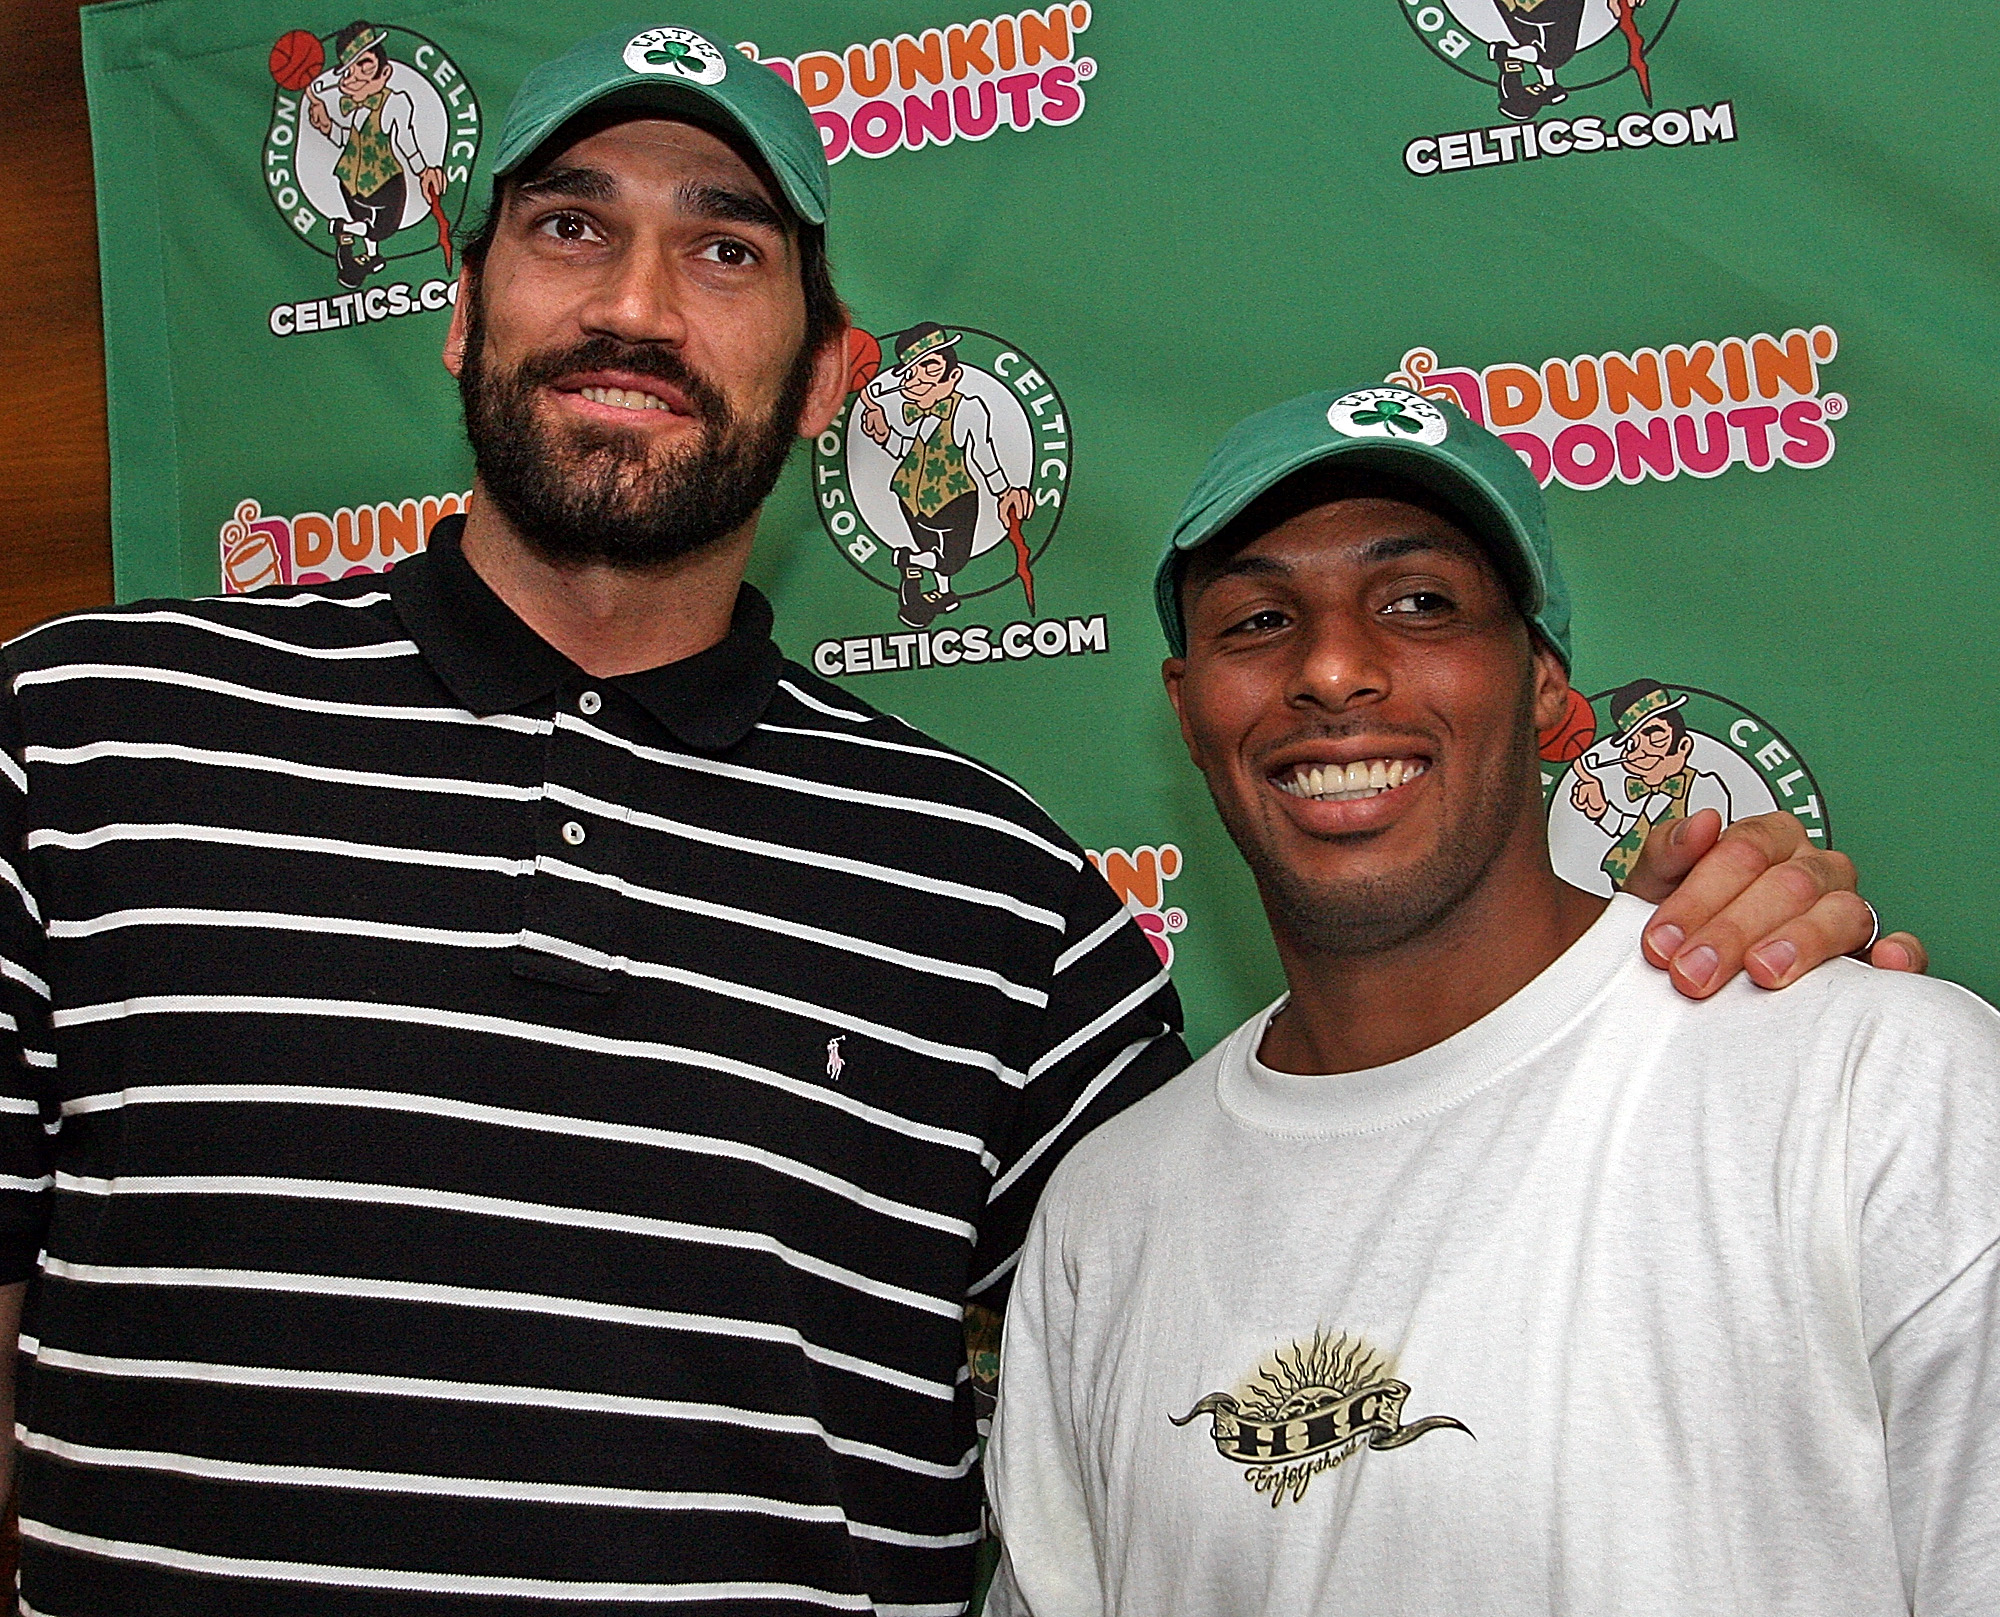 (080907 Boston, MA) Boston Celtics sign Scot Pollard (left) formally of the Cleveland Cavaliers and Eddie House formally of the New Jersey Nets. Thursday, August 09, 2007. Staff photo by Matt Stone